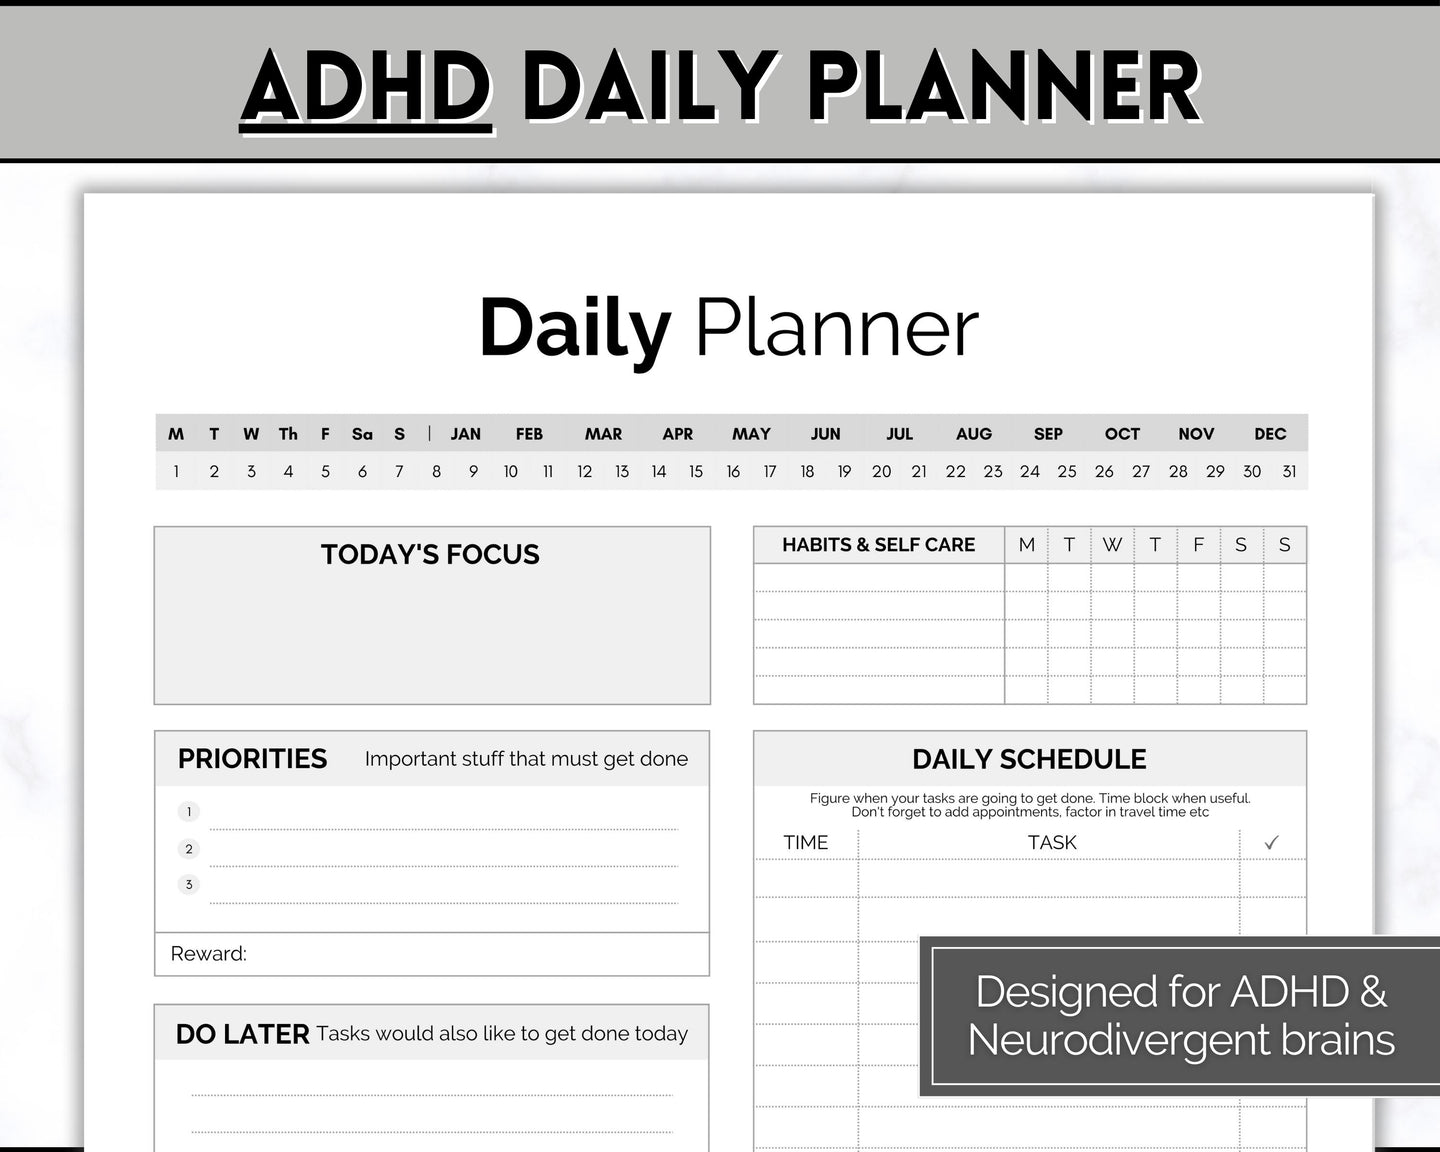 ADHD Daily Planner for Adults - Made for Neurodivergent Brains | Mono